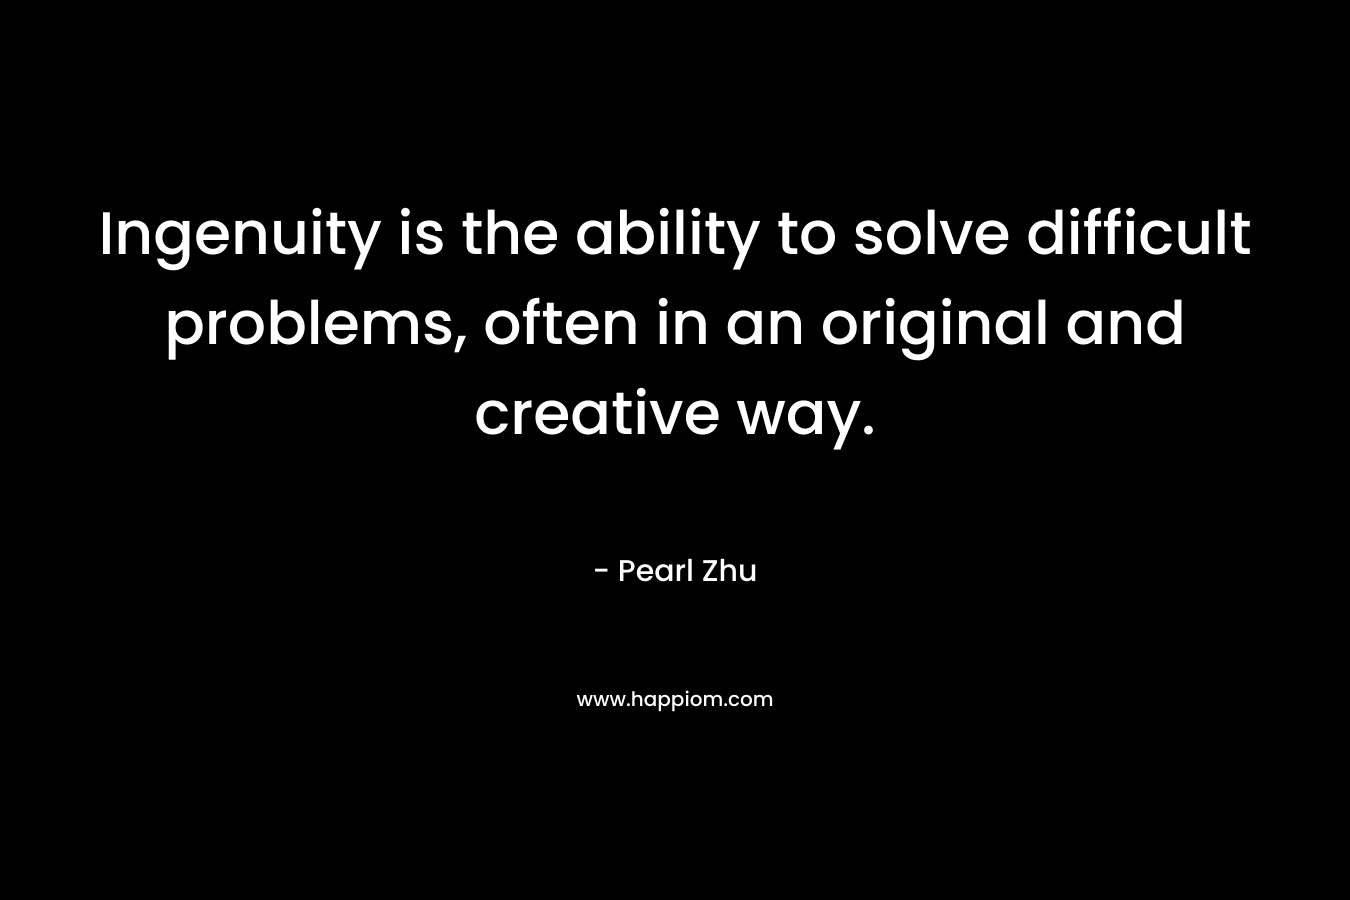 Ingenuity is the ability to solve difficult problems, often in an original and creative way. – Pearl Zhu